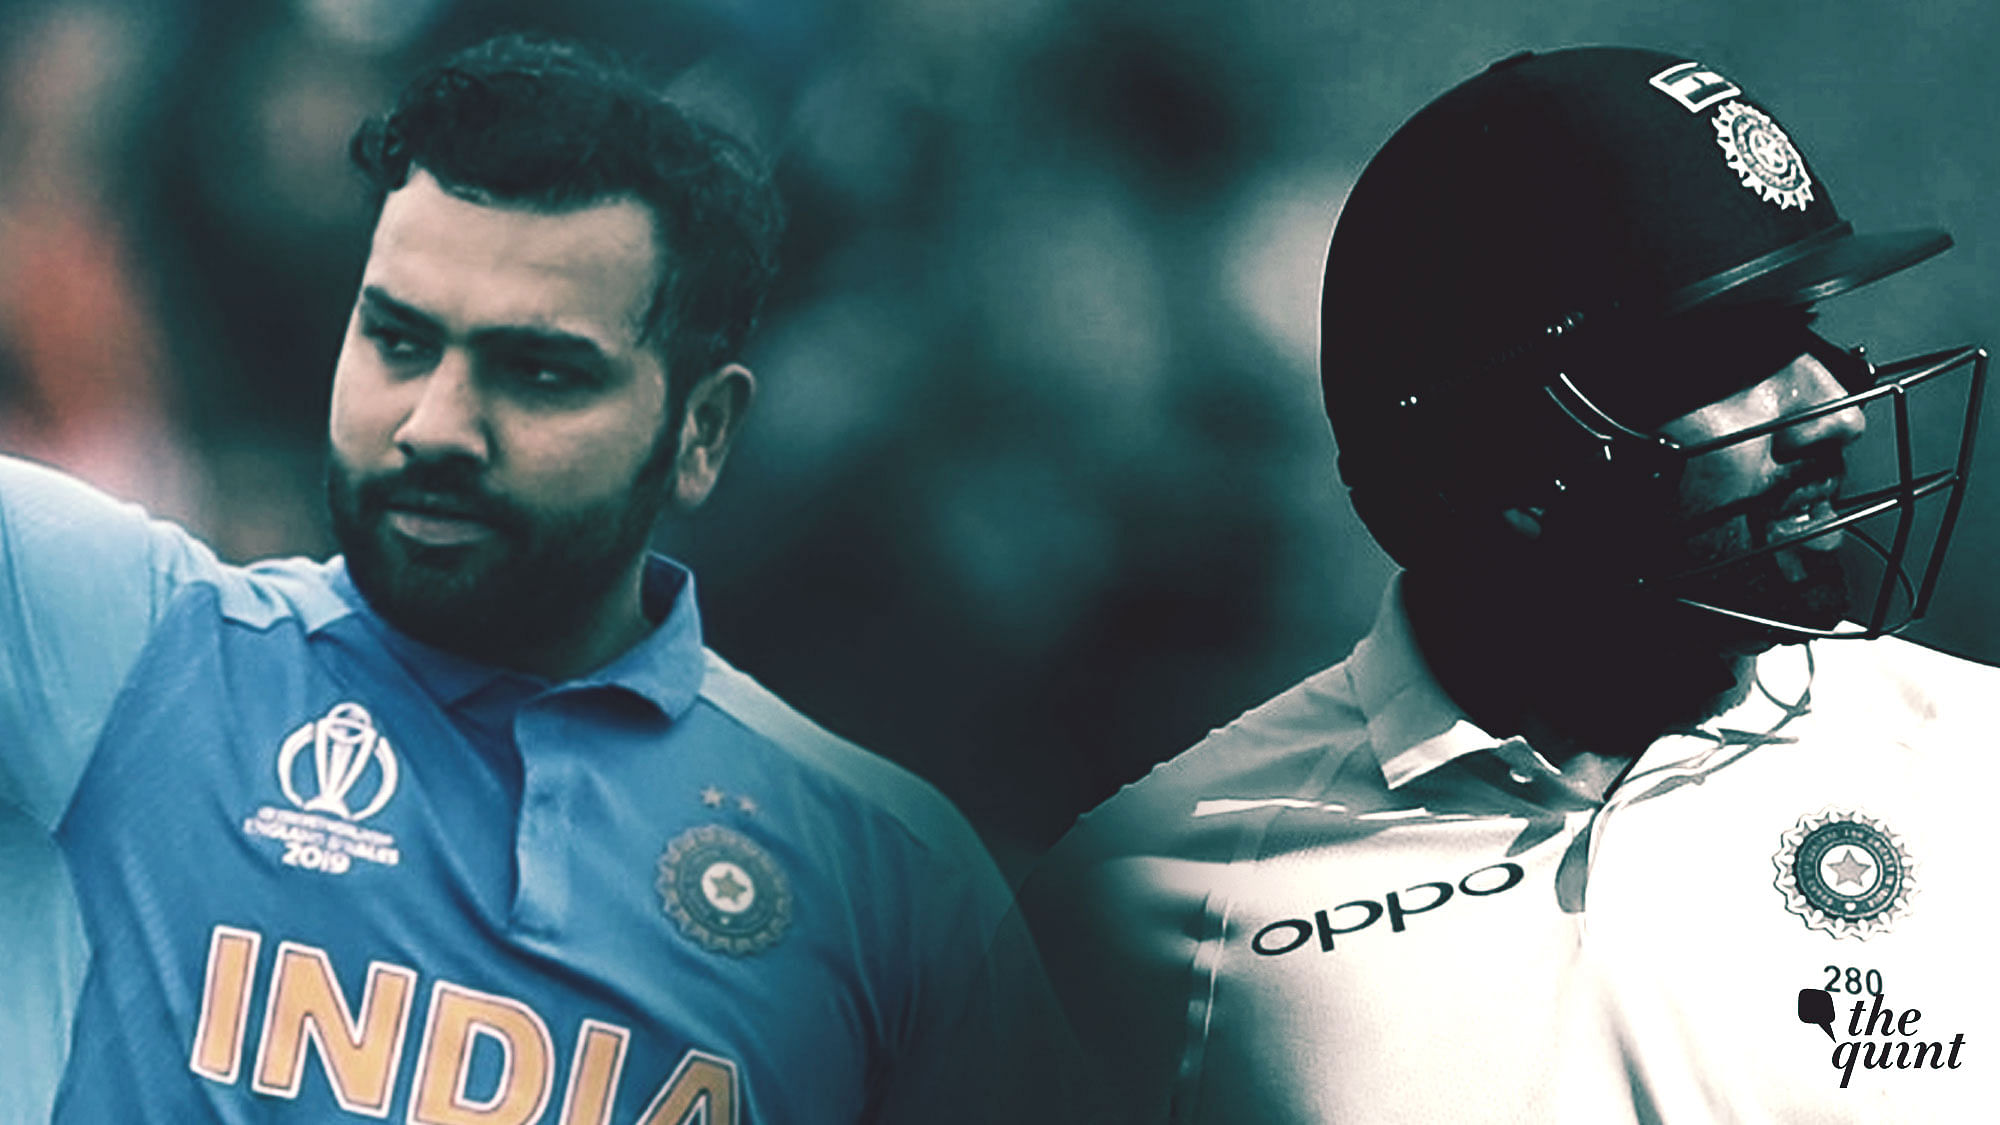 Why has Rohit Sharma not been able to replicate his white-ball form in Test cricket?